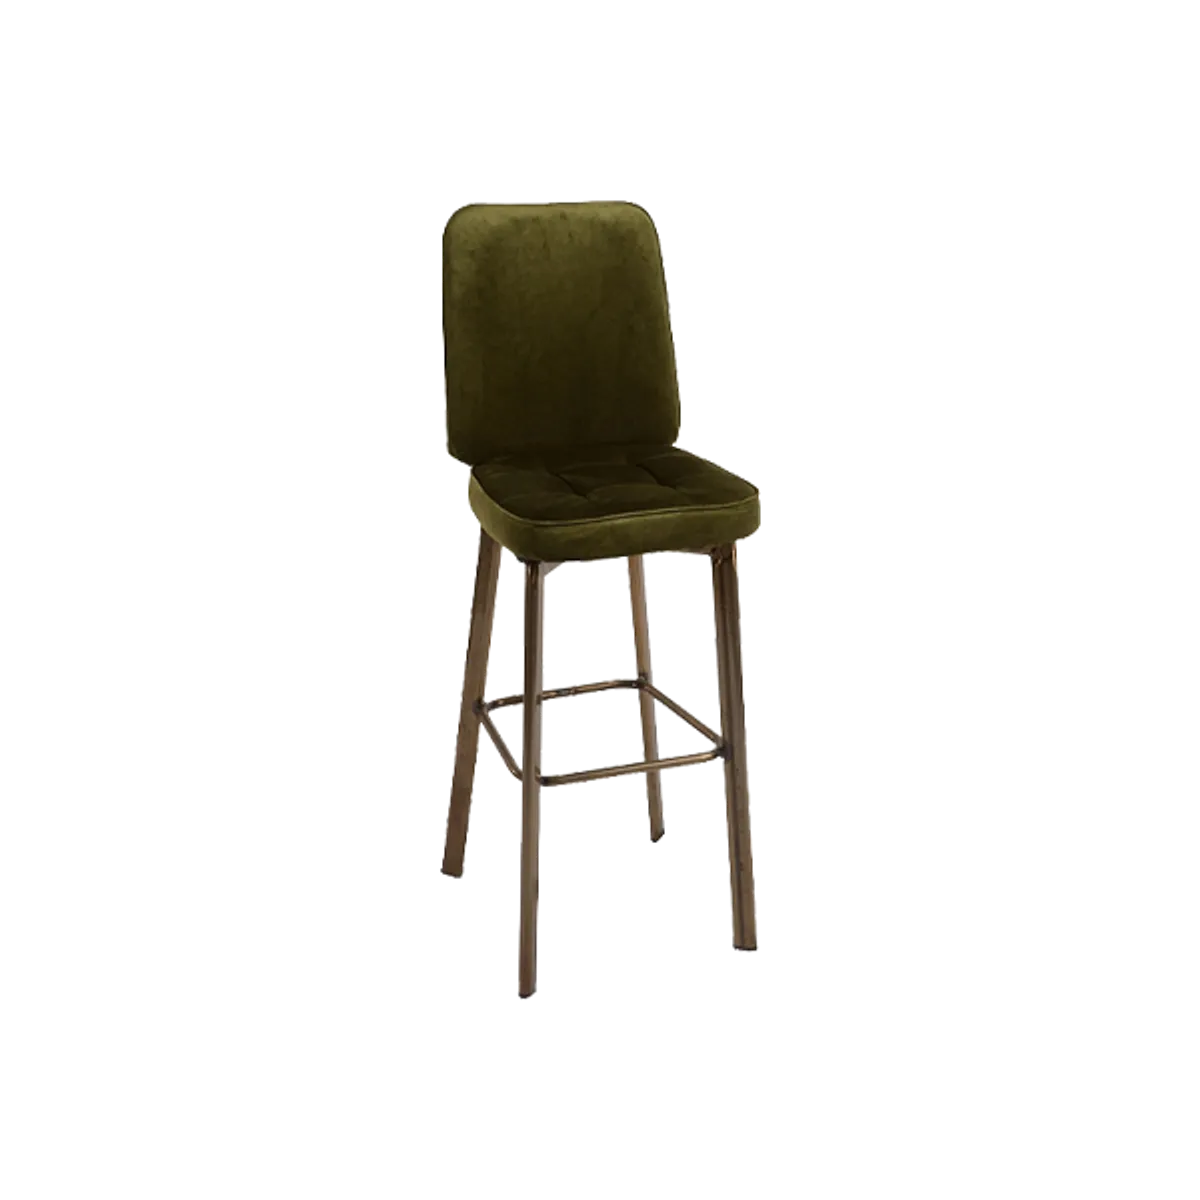 Galley Bar Stool Feature Metal Frame Inside Out Contracts 1